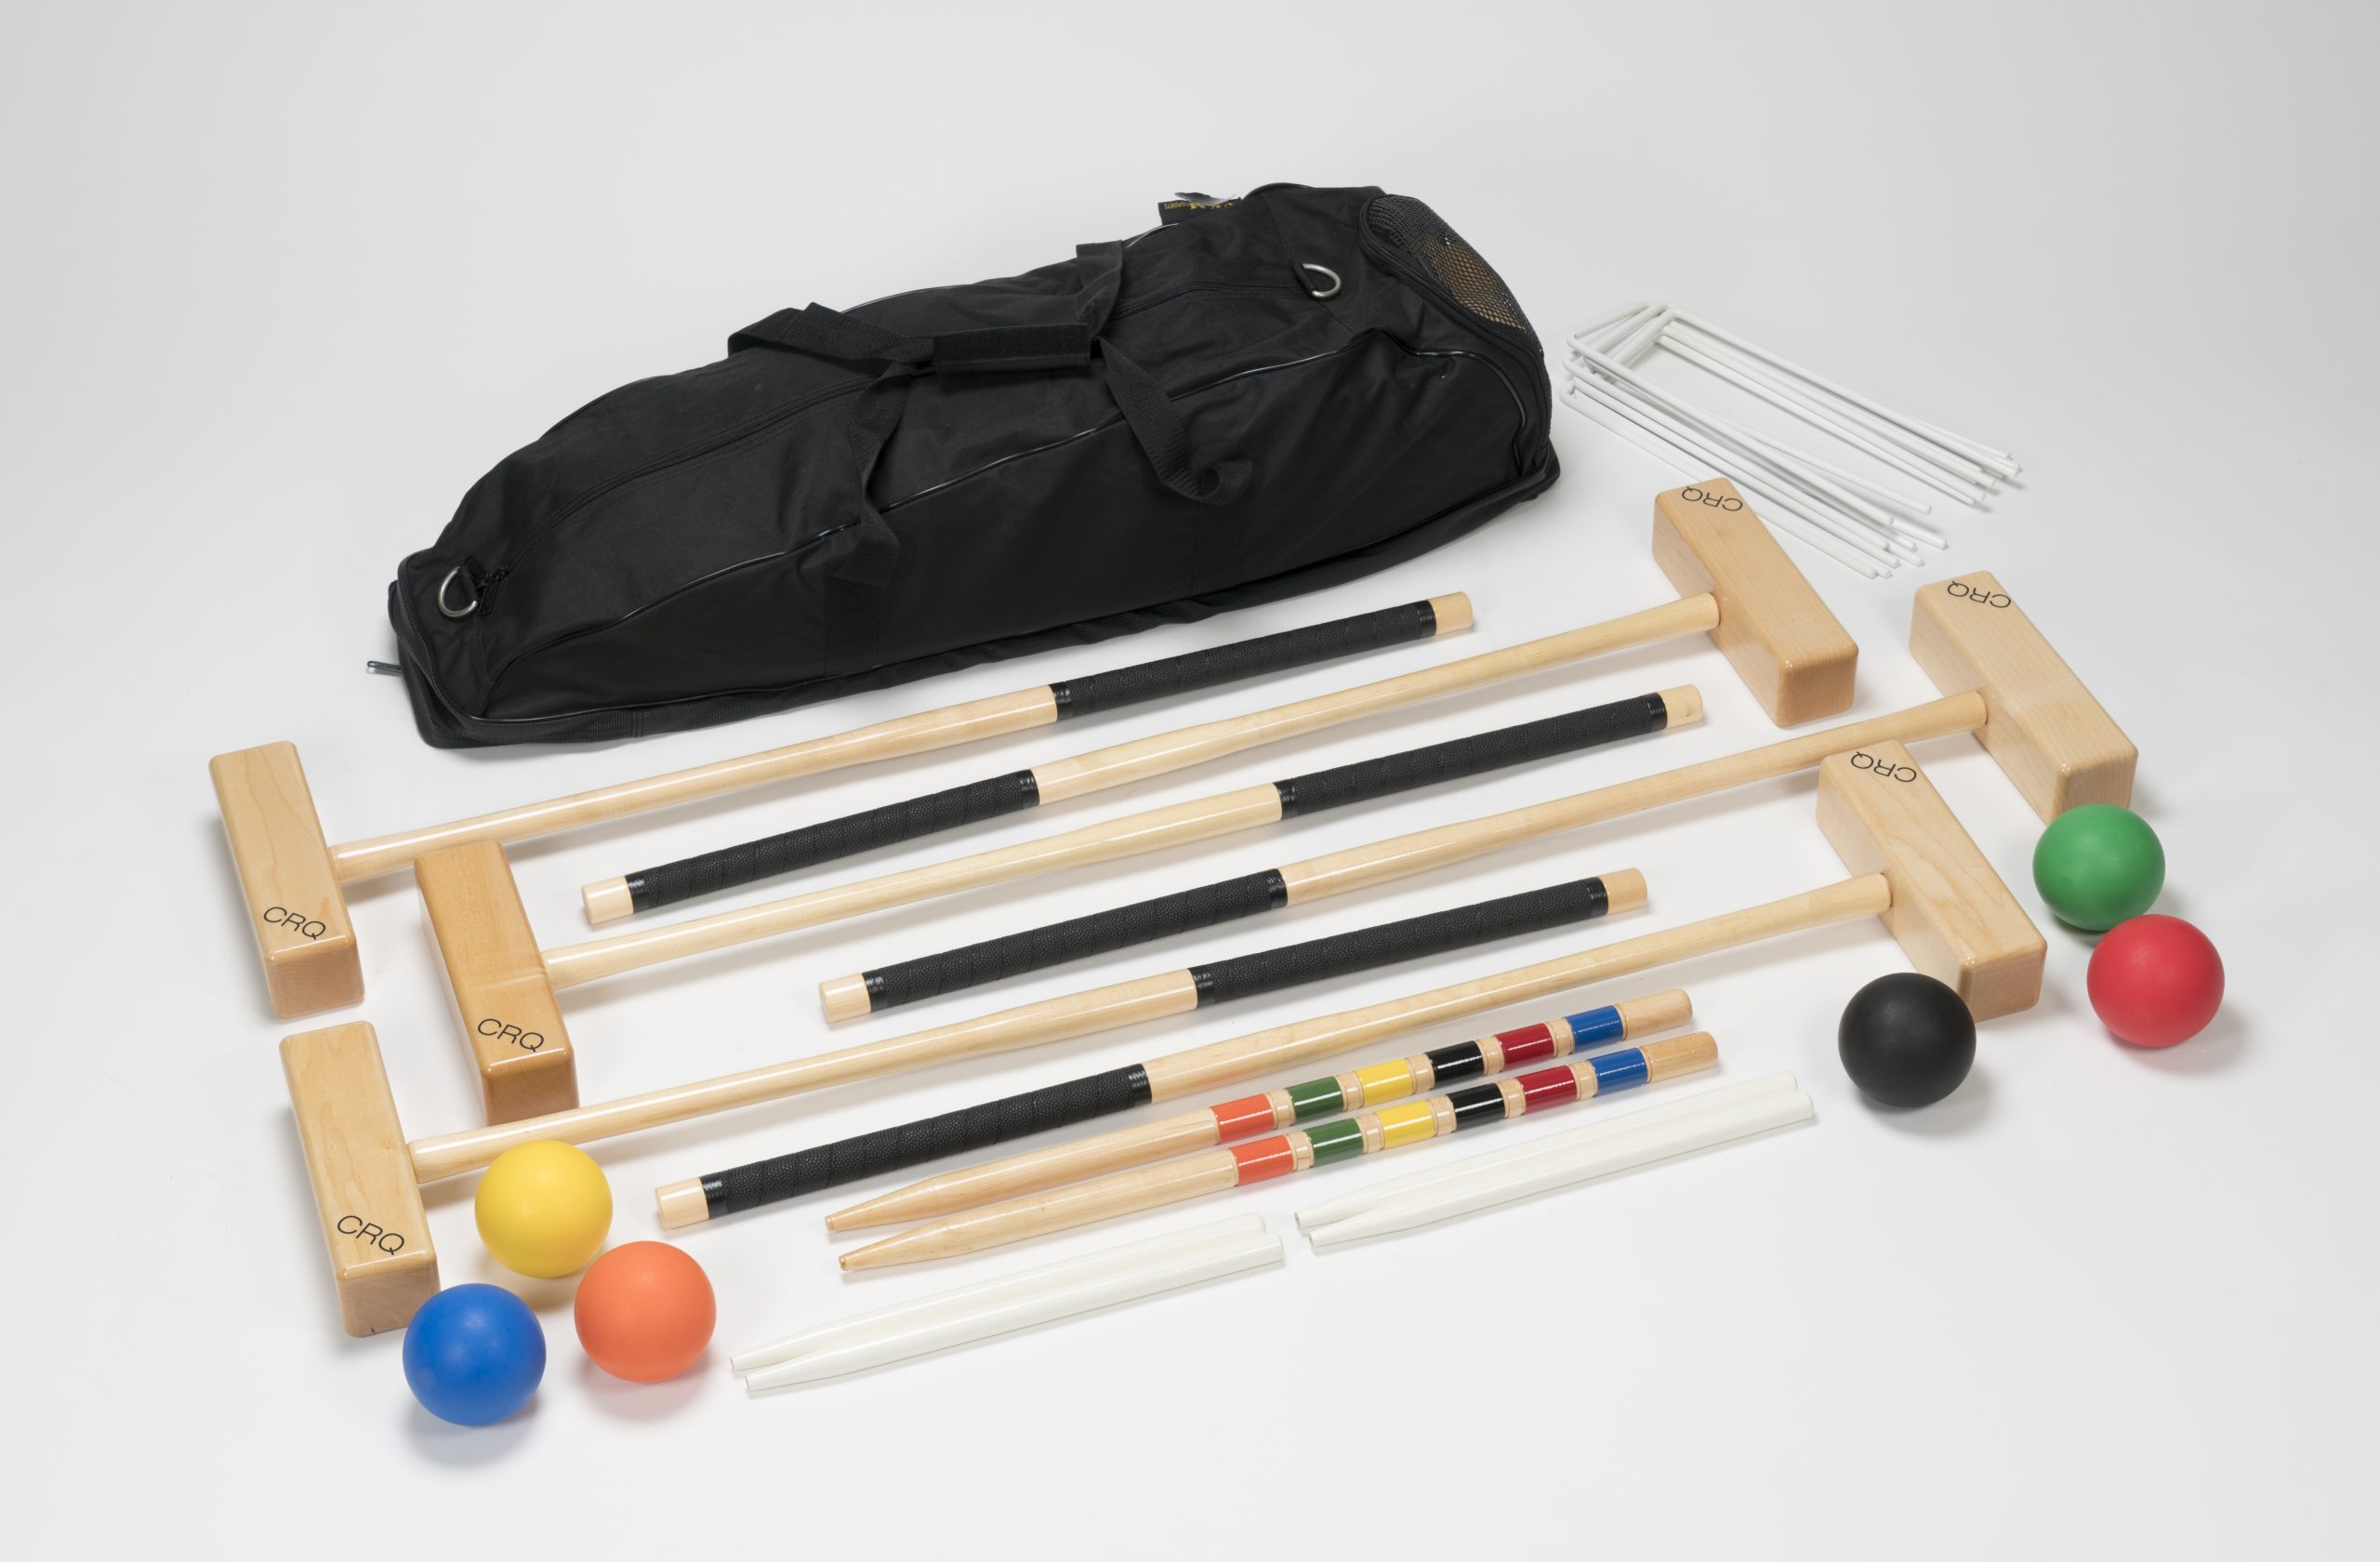 CRQ 110 Croquet Set: CRQ Amish Made Classic 9 Wicket/6 Player, Soft Case, Mallets